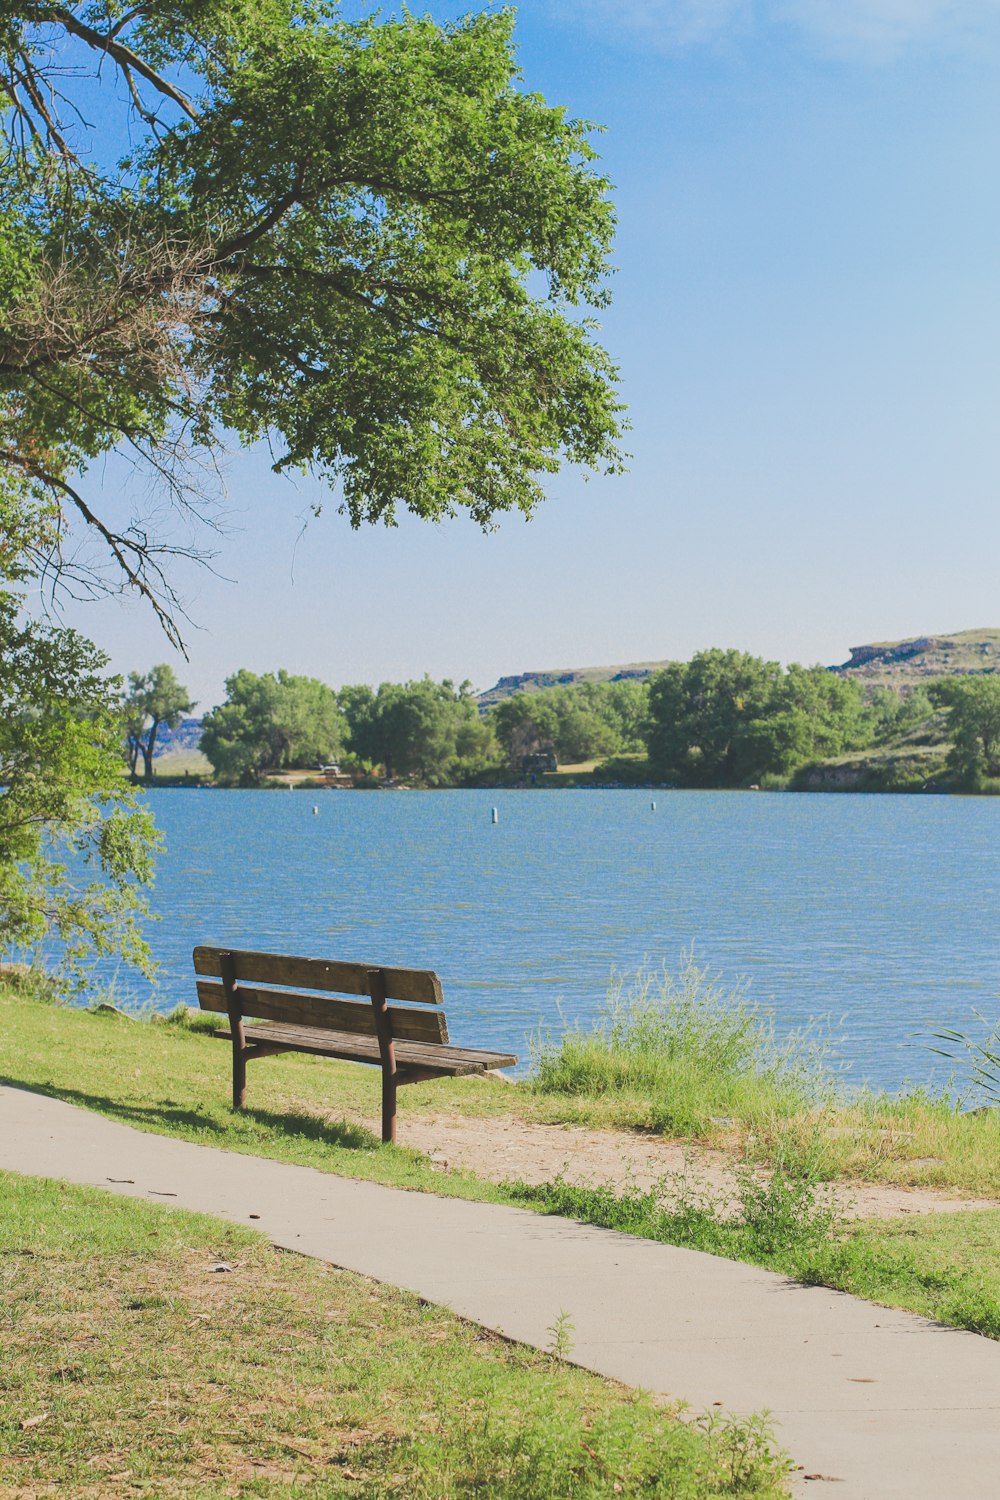 a park bench sitting on the side of a lake